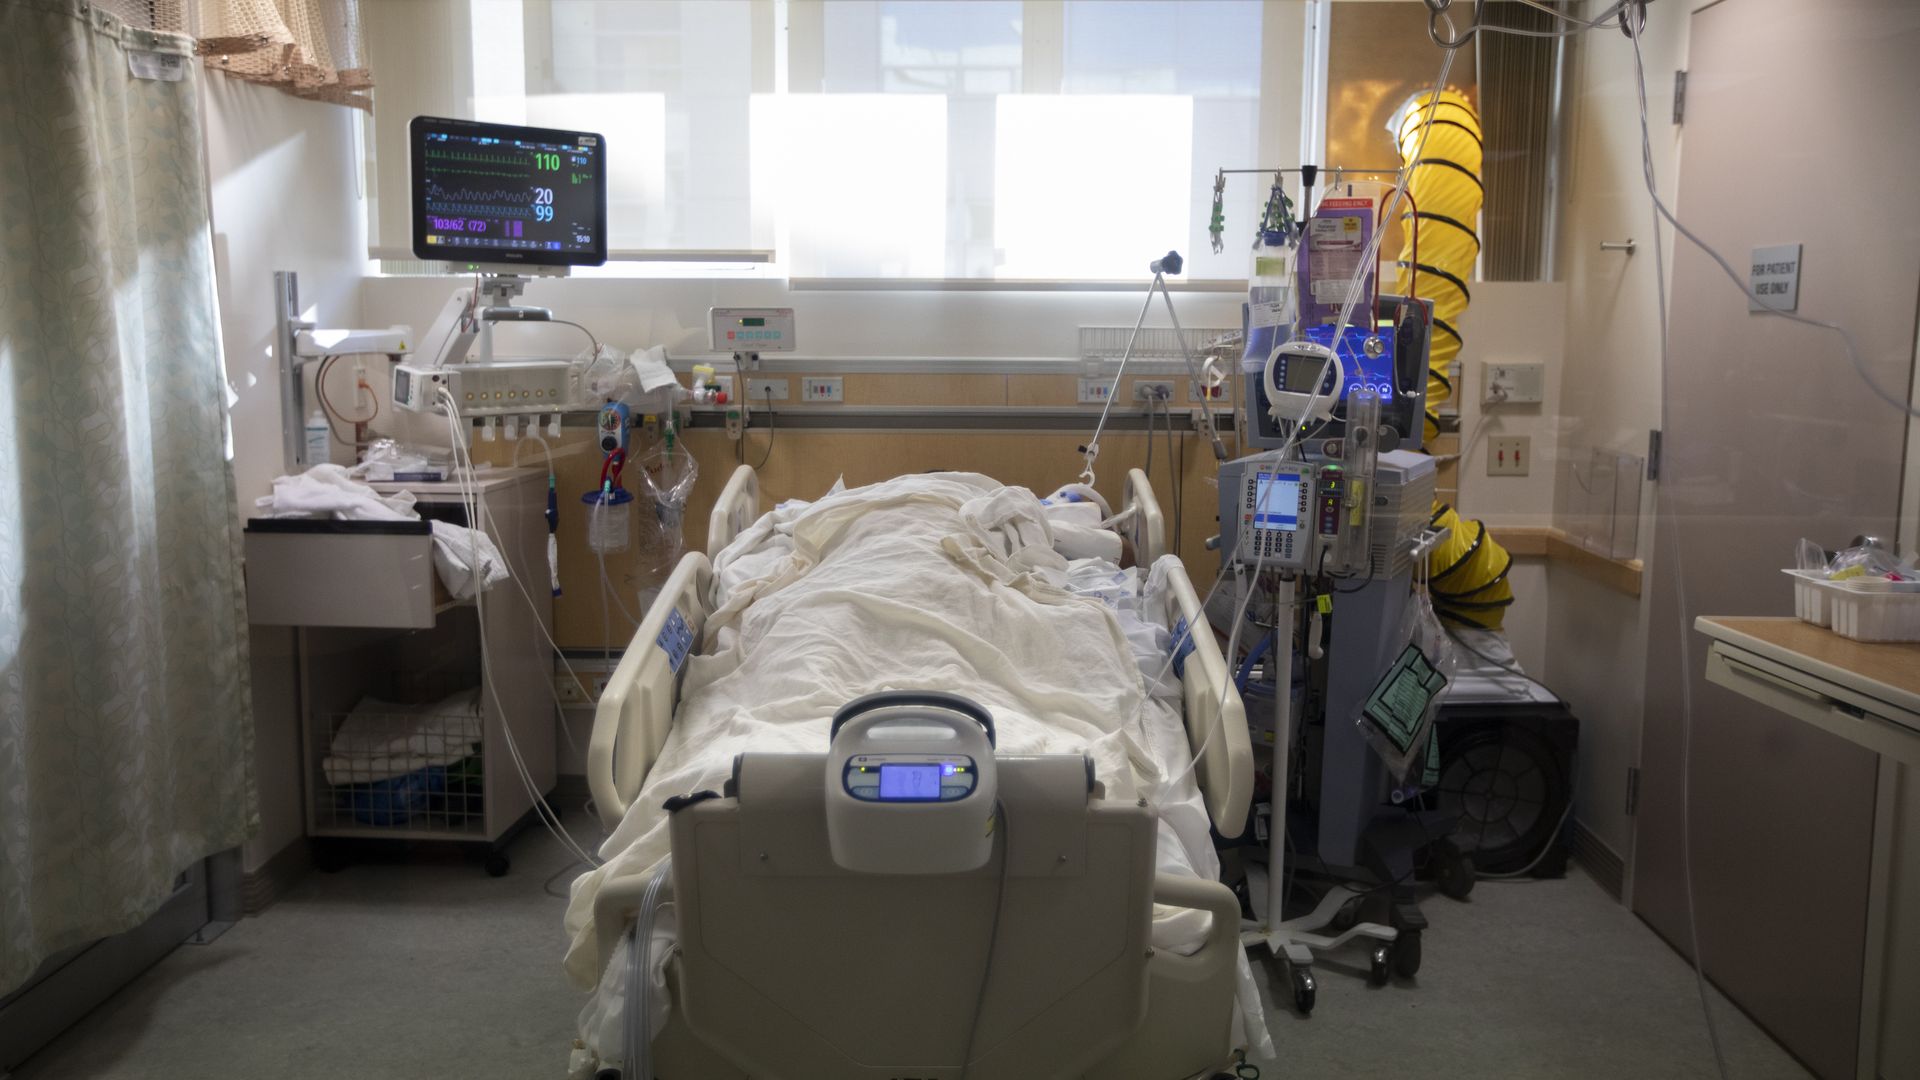 A patient lays fully covered in a white hospital bed with monitors on each side.